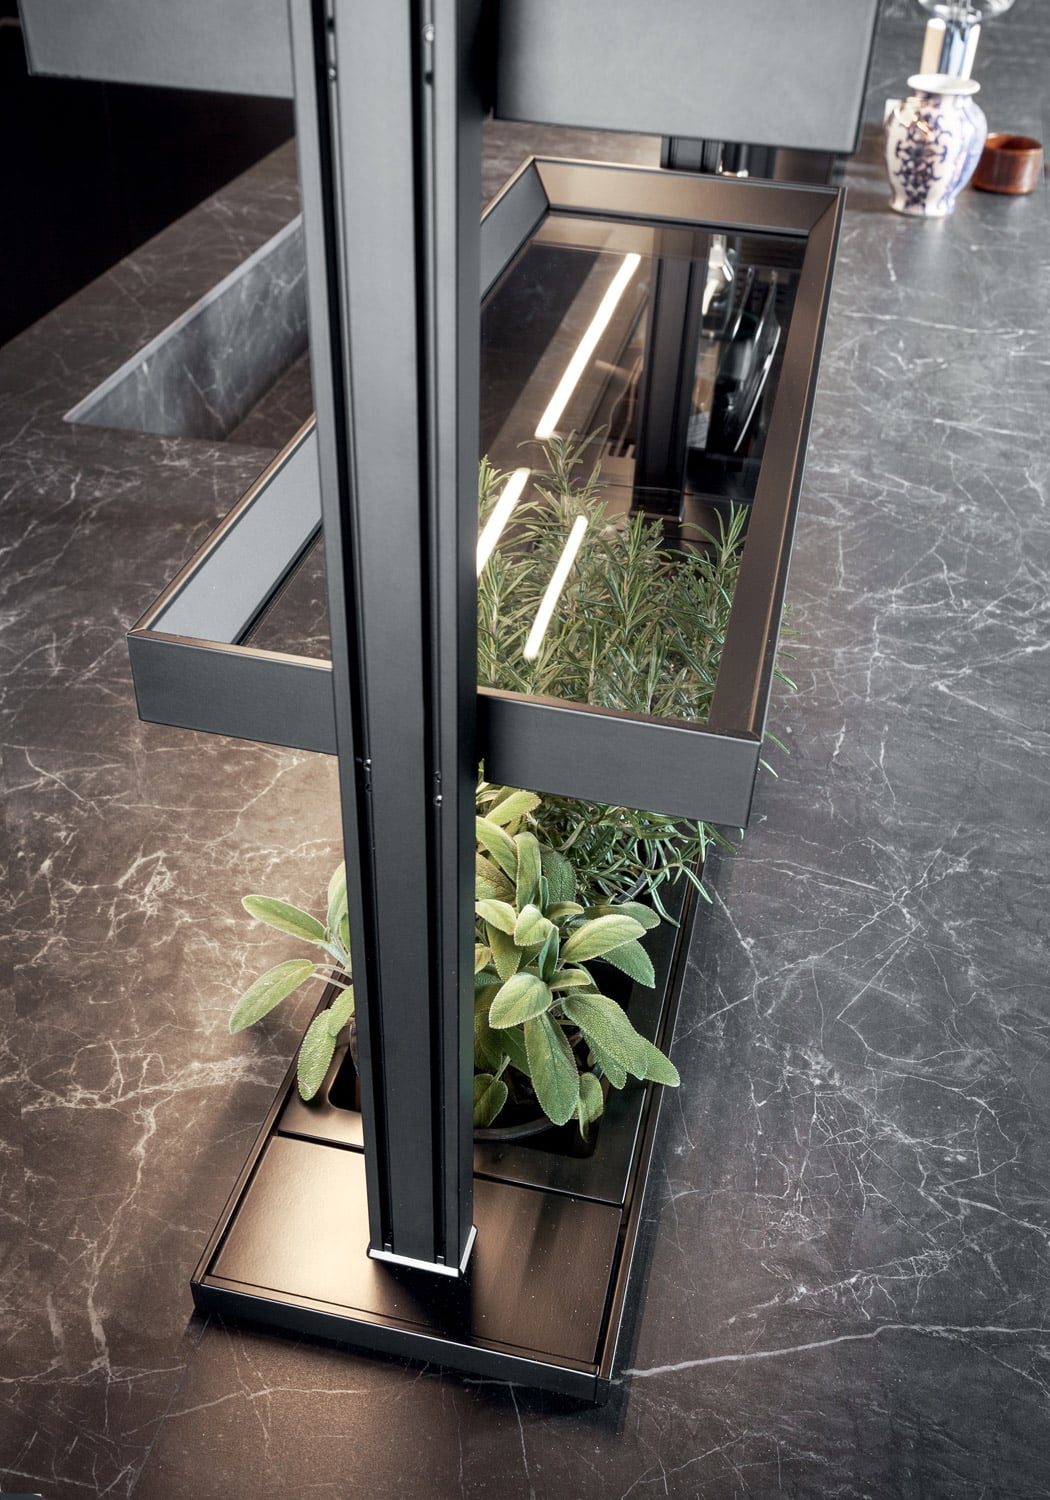 Detail of the custom open storage system. The black anodized aluminum profile angles inward towards the glass shelves to prevent objects from falling.